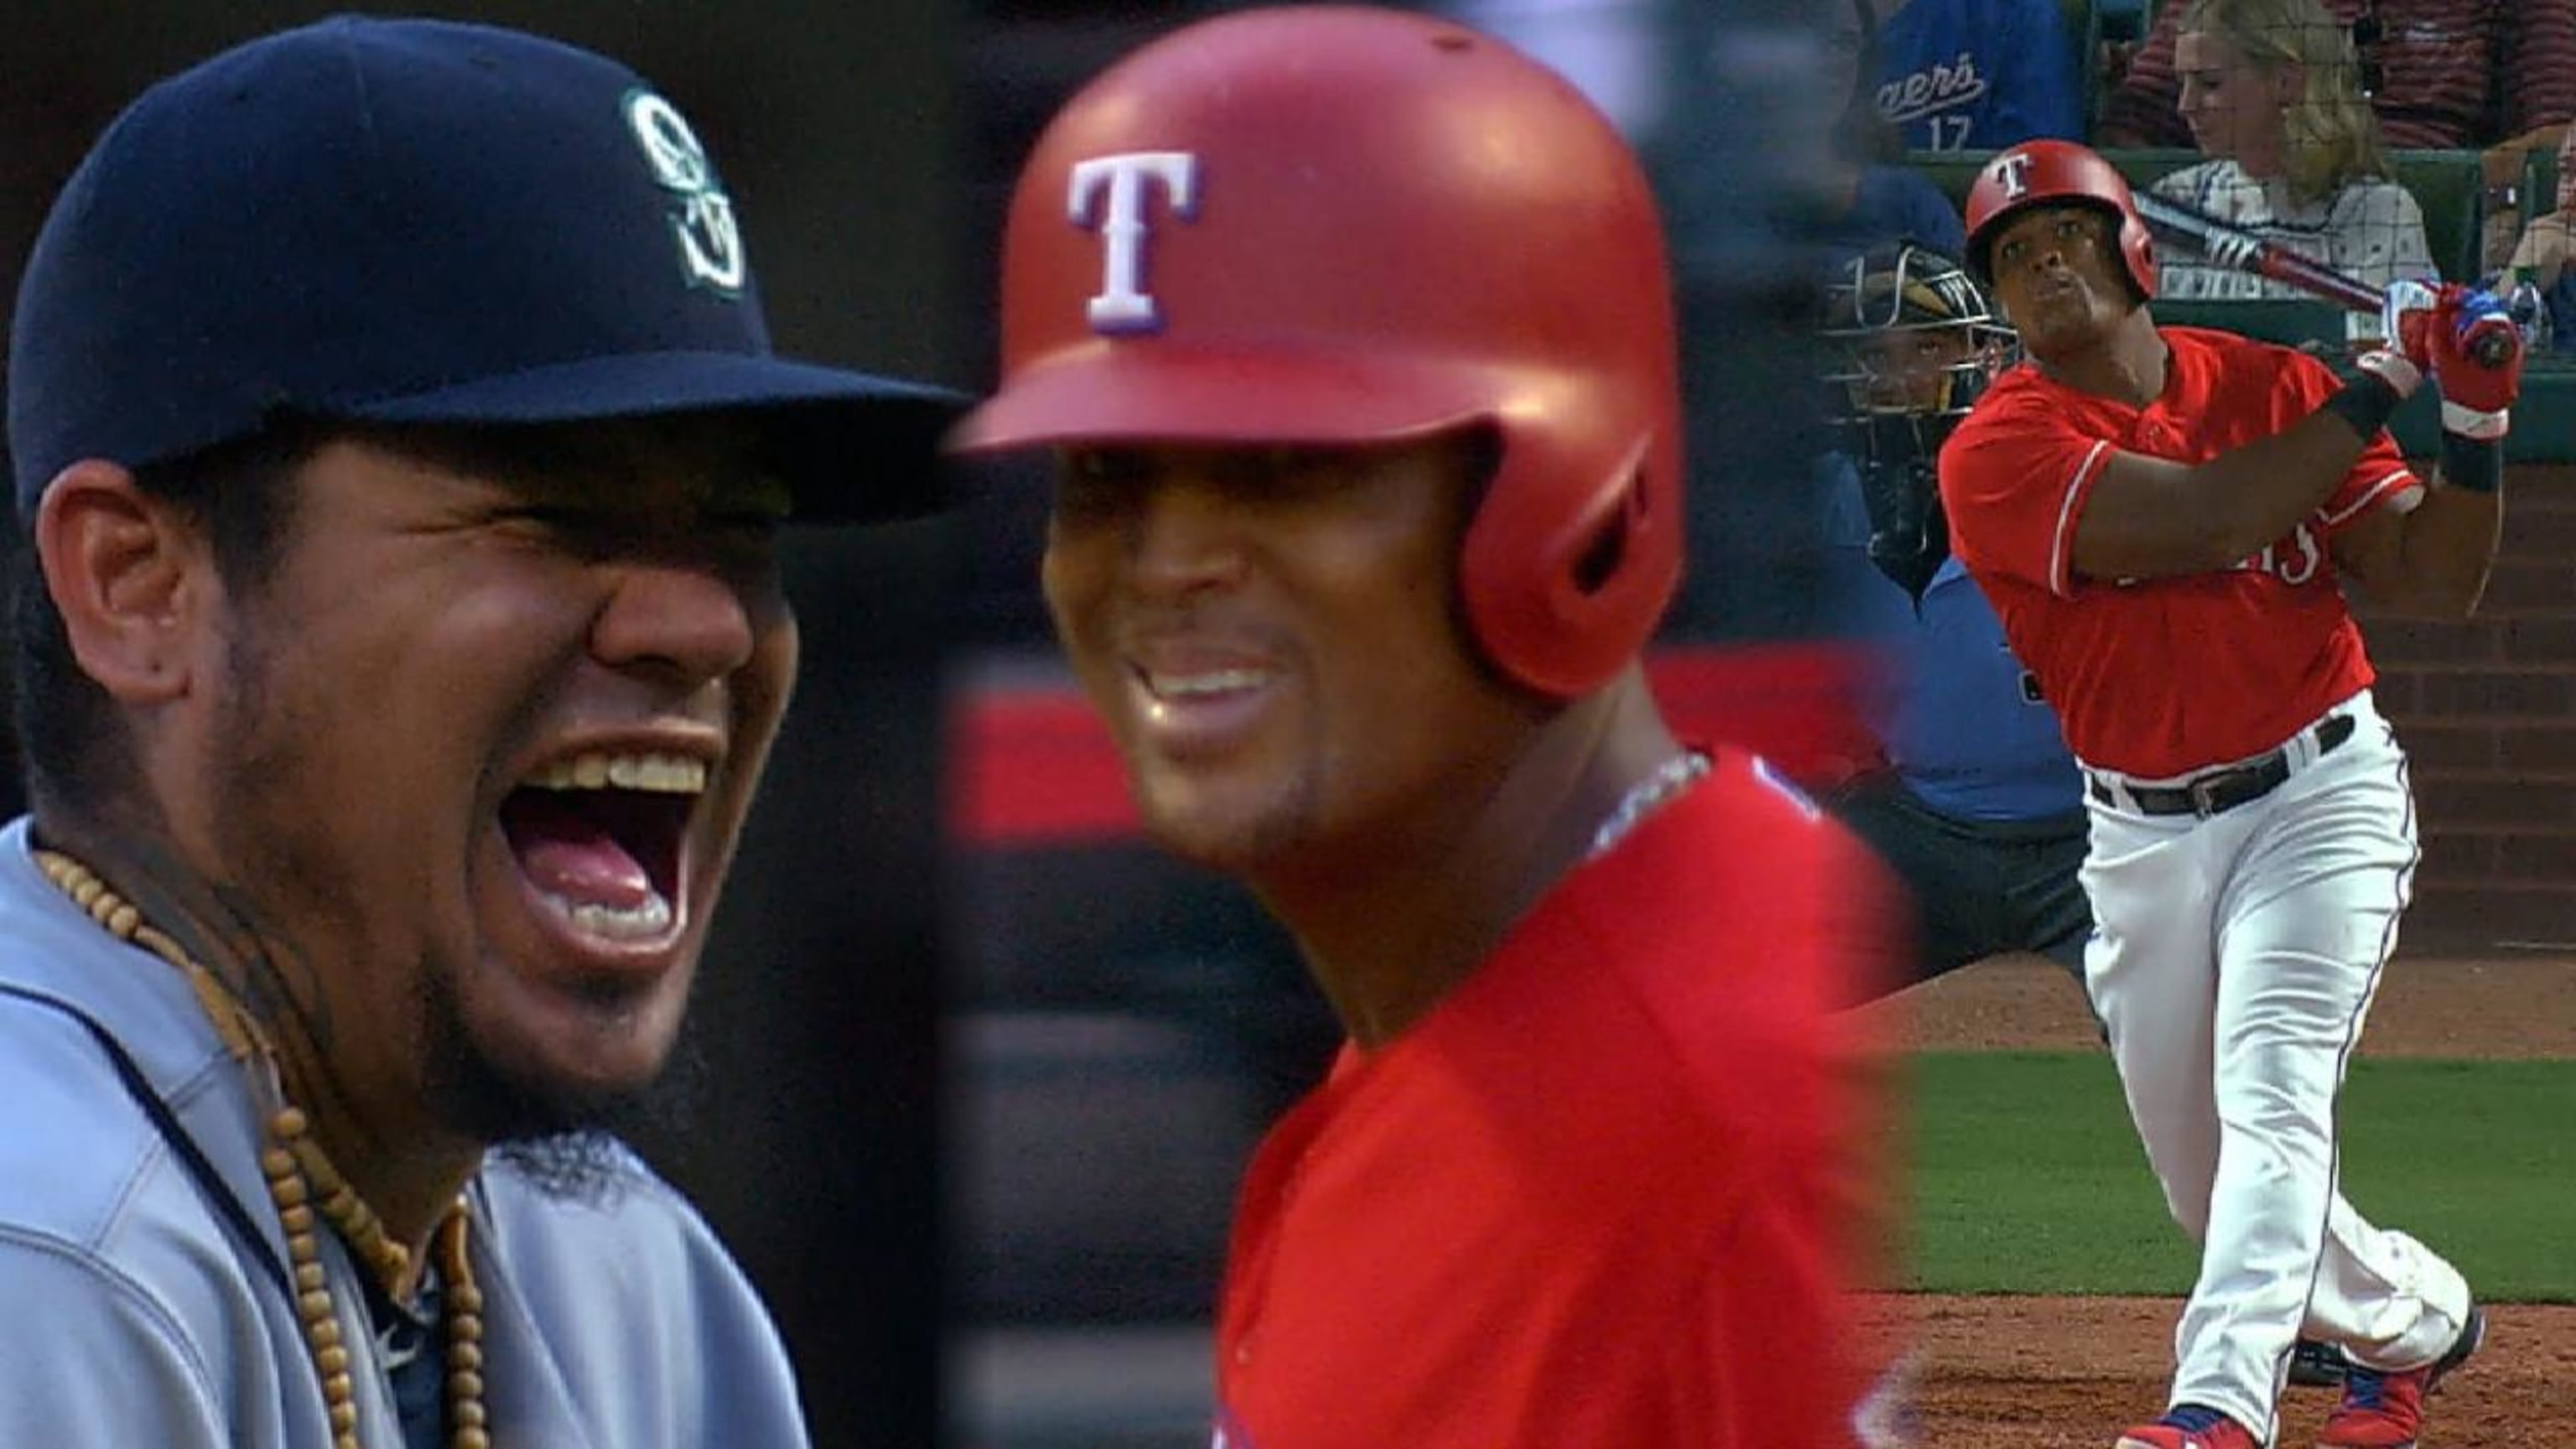 Felix Hernandez struck out Adrian Beltre and had a laugh at his expense